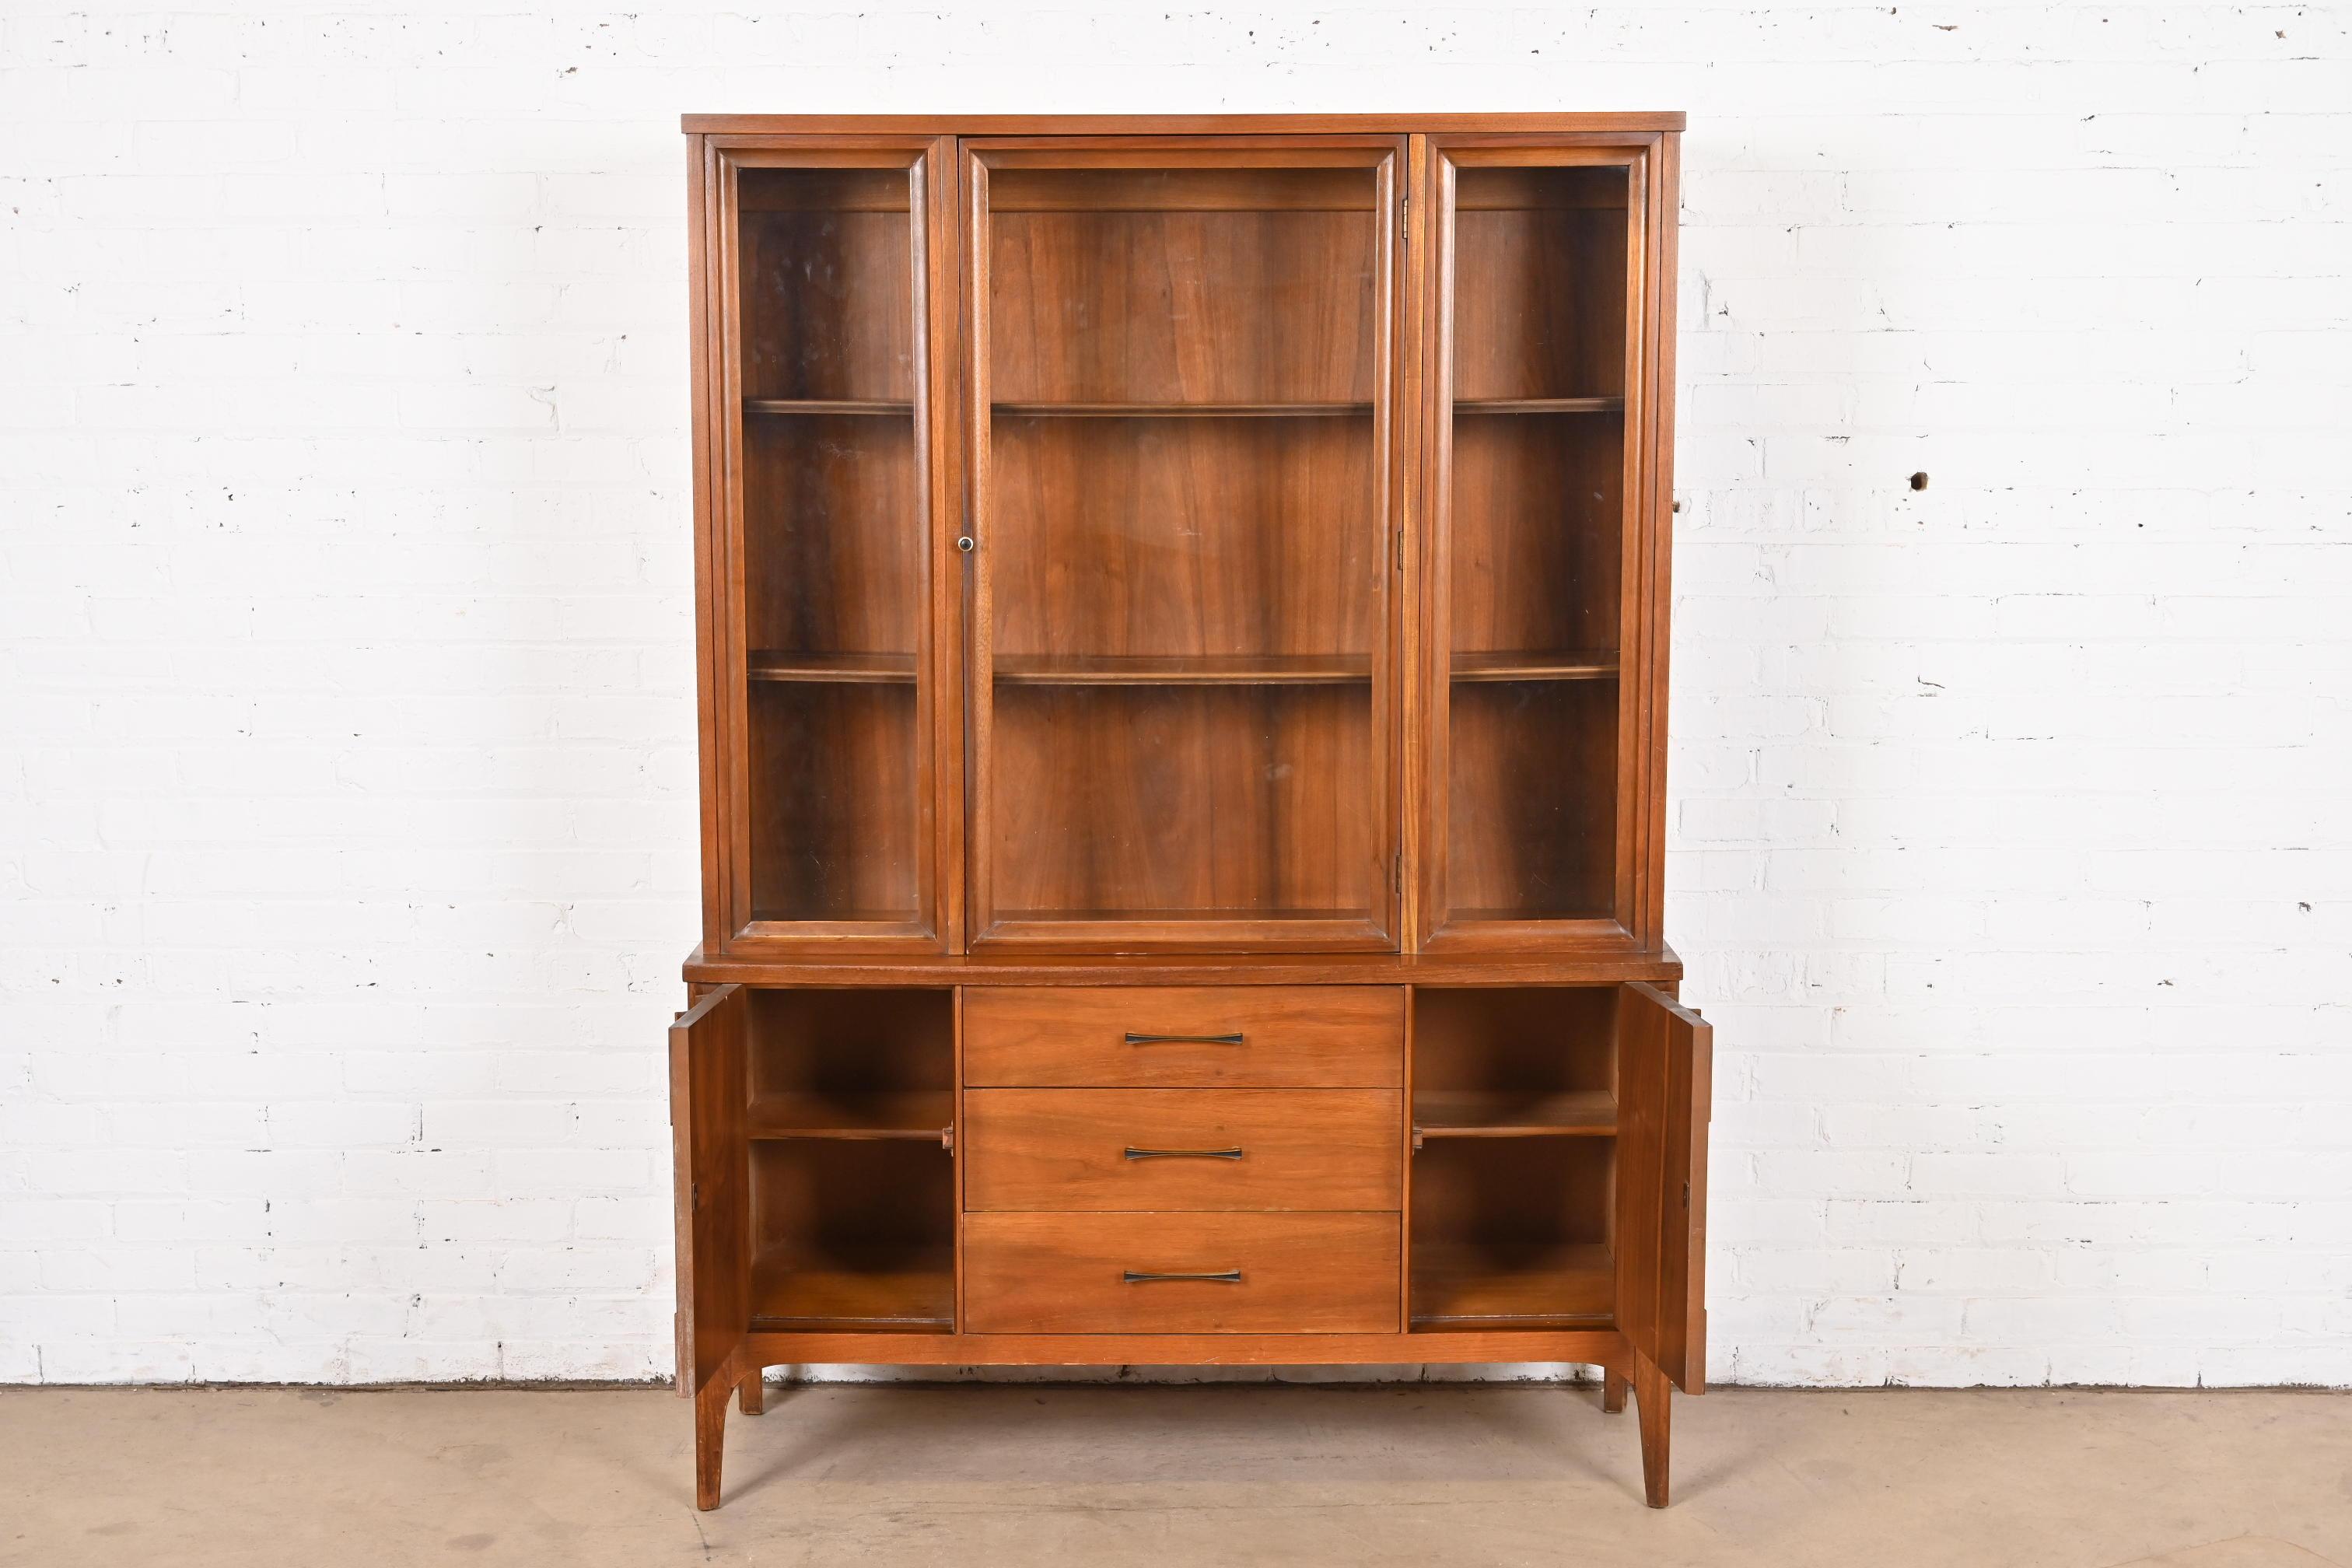 Broyhill Brasilia Style Sculpted Walnut Breakfront Bookcase or China Cabinet 3